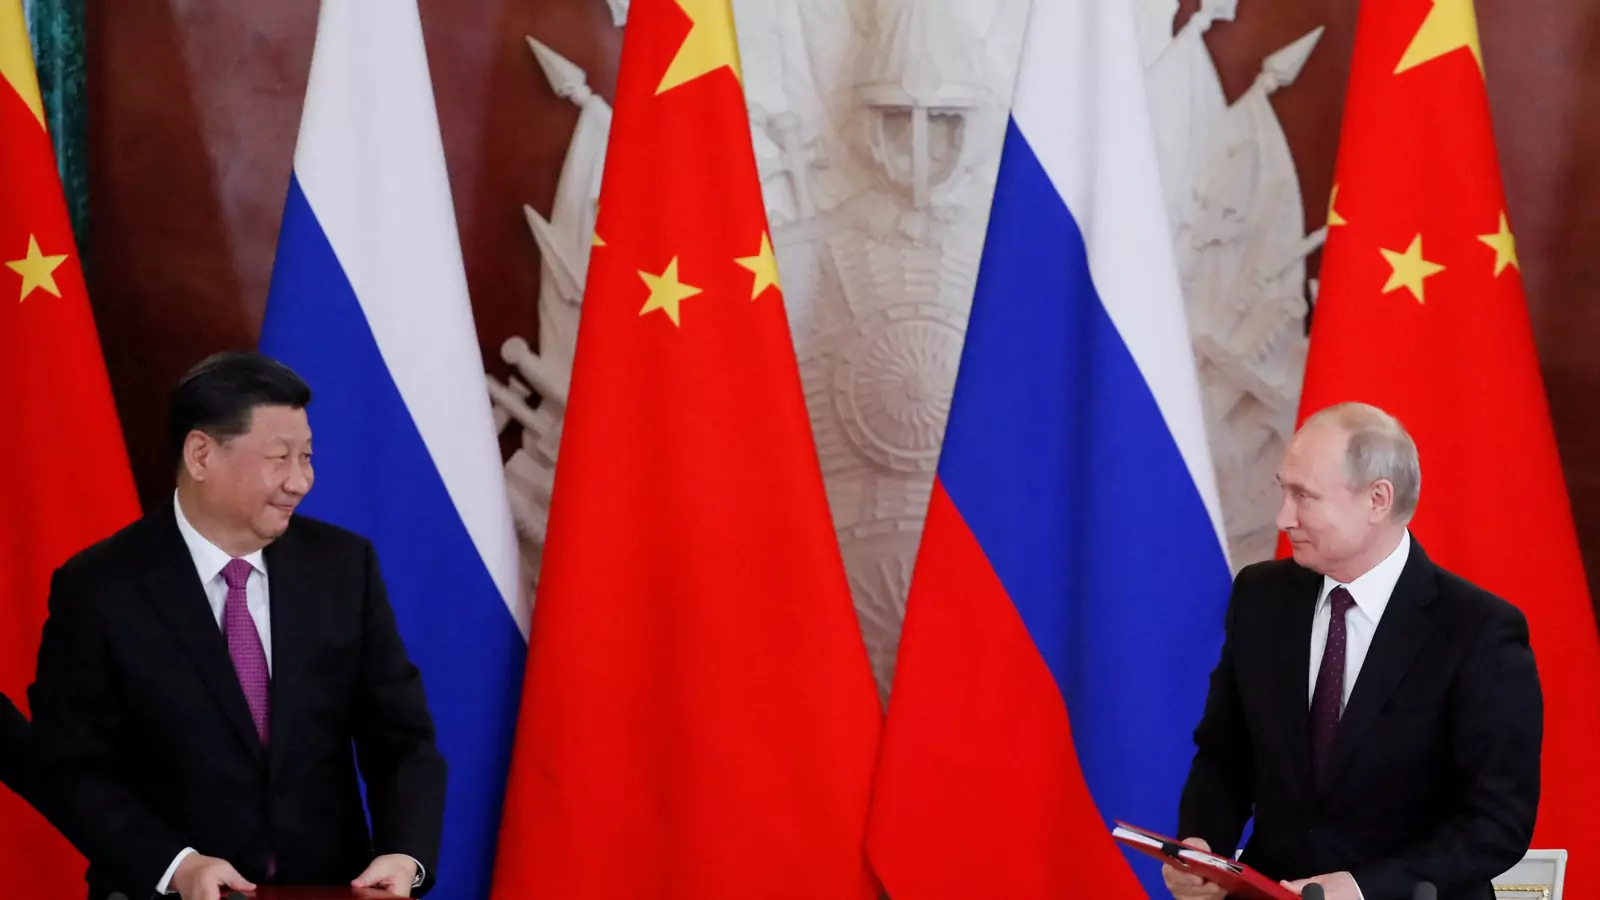 Russian President Vladimir Putin and his Chinese counterpart Xi Jinping look on during a signing ceremony in Moscow, Russia, June 5, 2019.